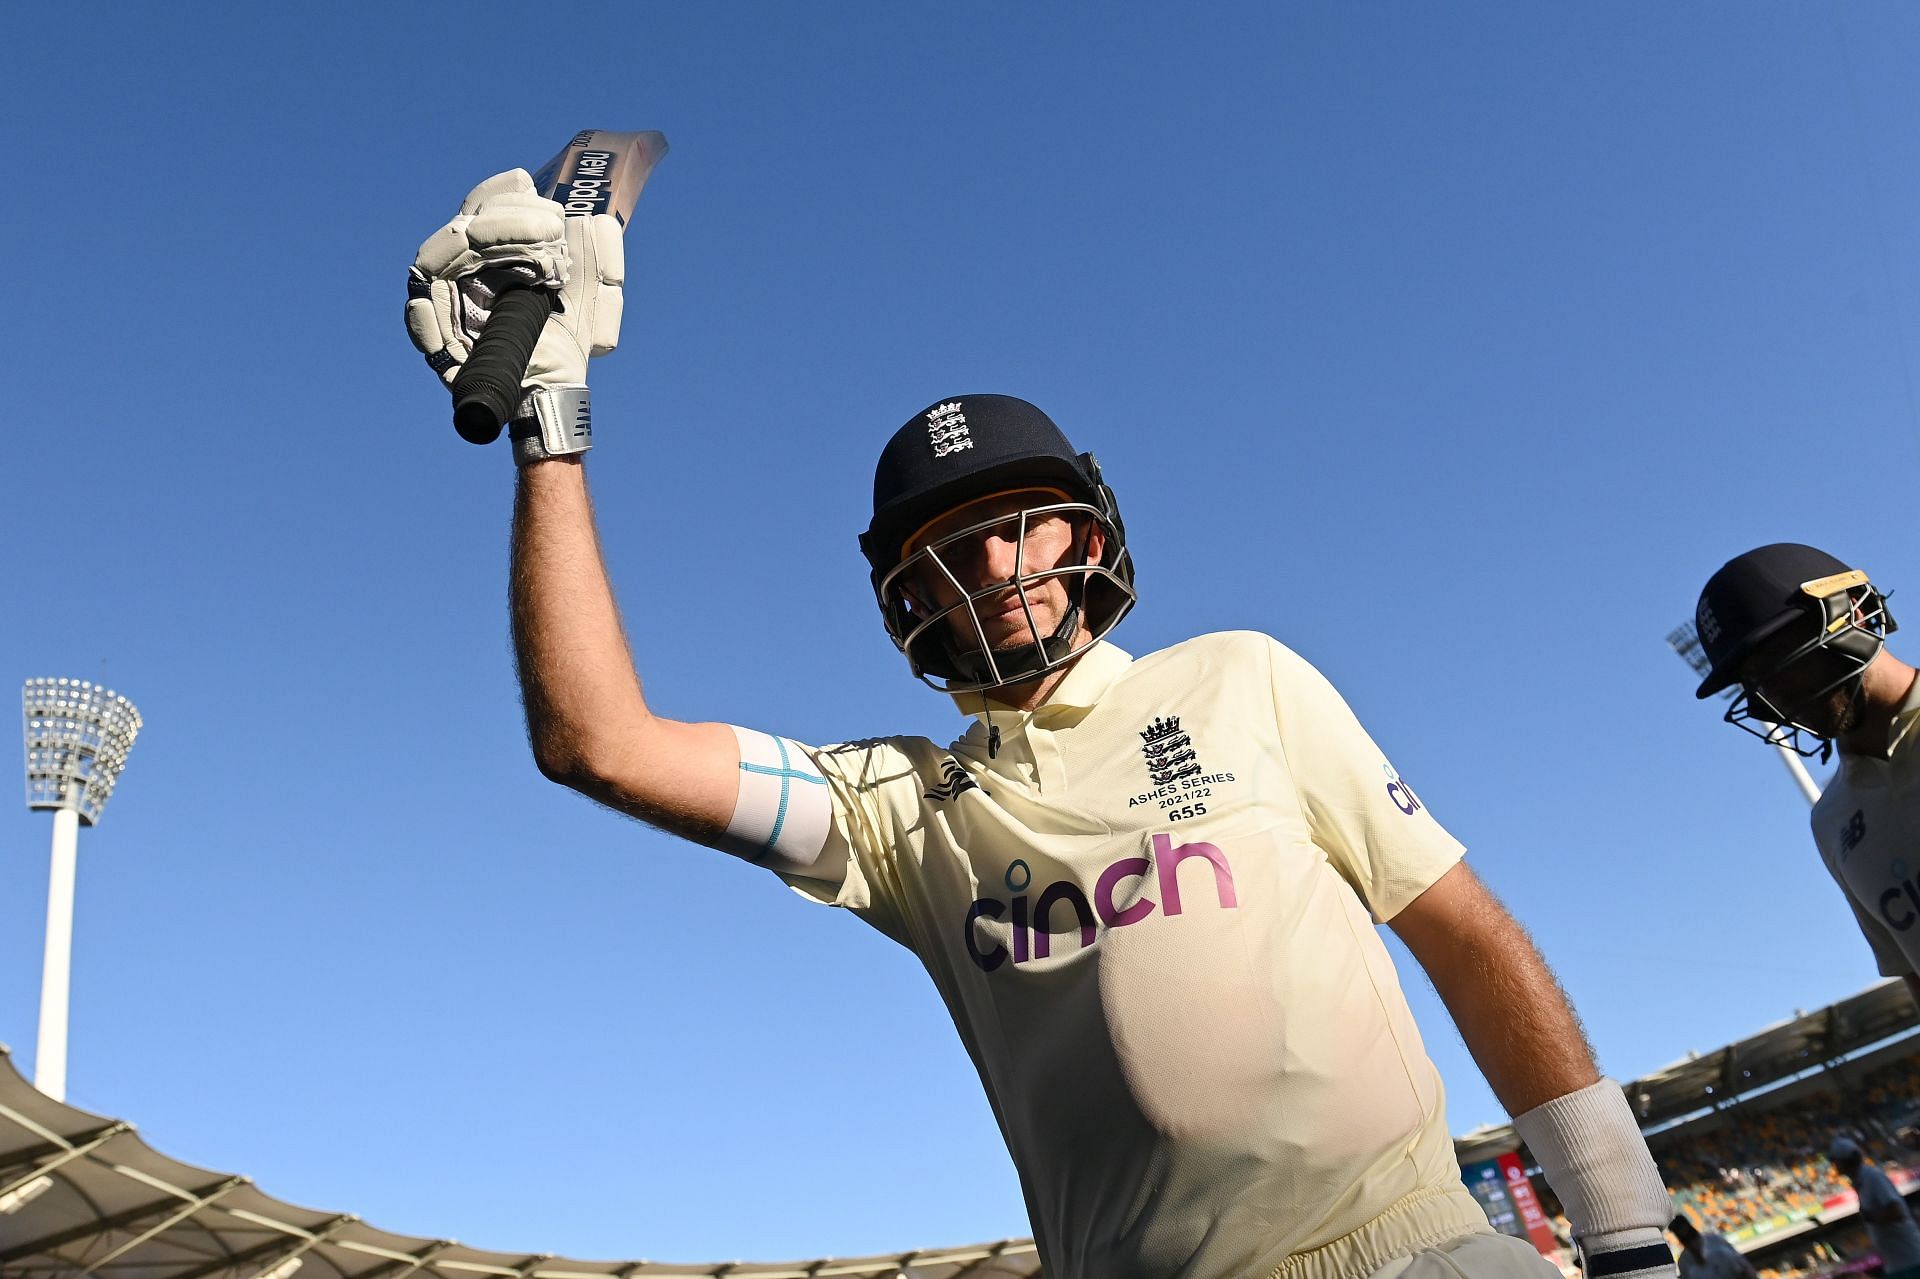 Joe Root scored a magnificent half-century in the second innings